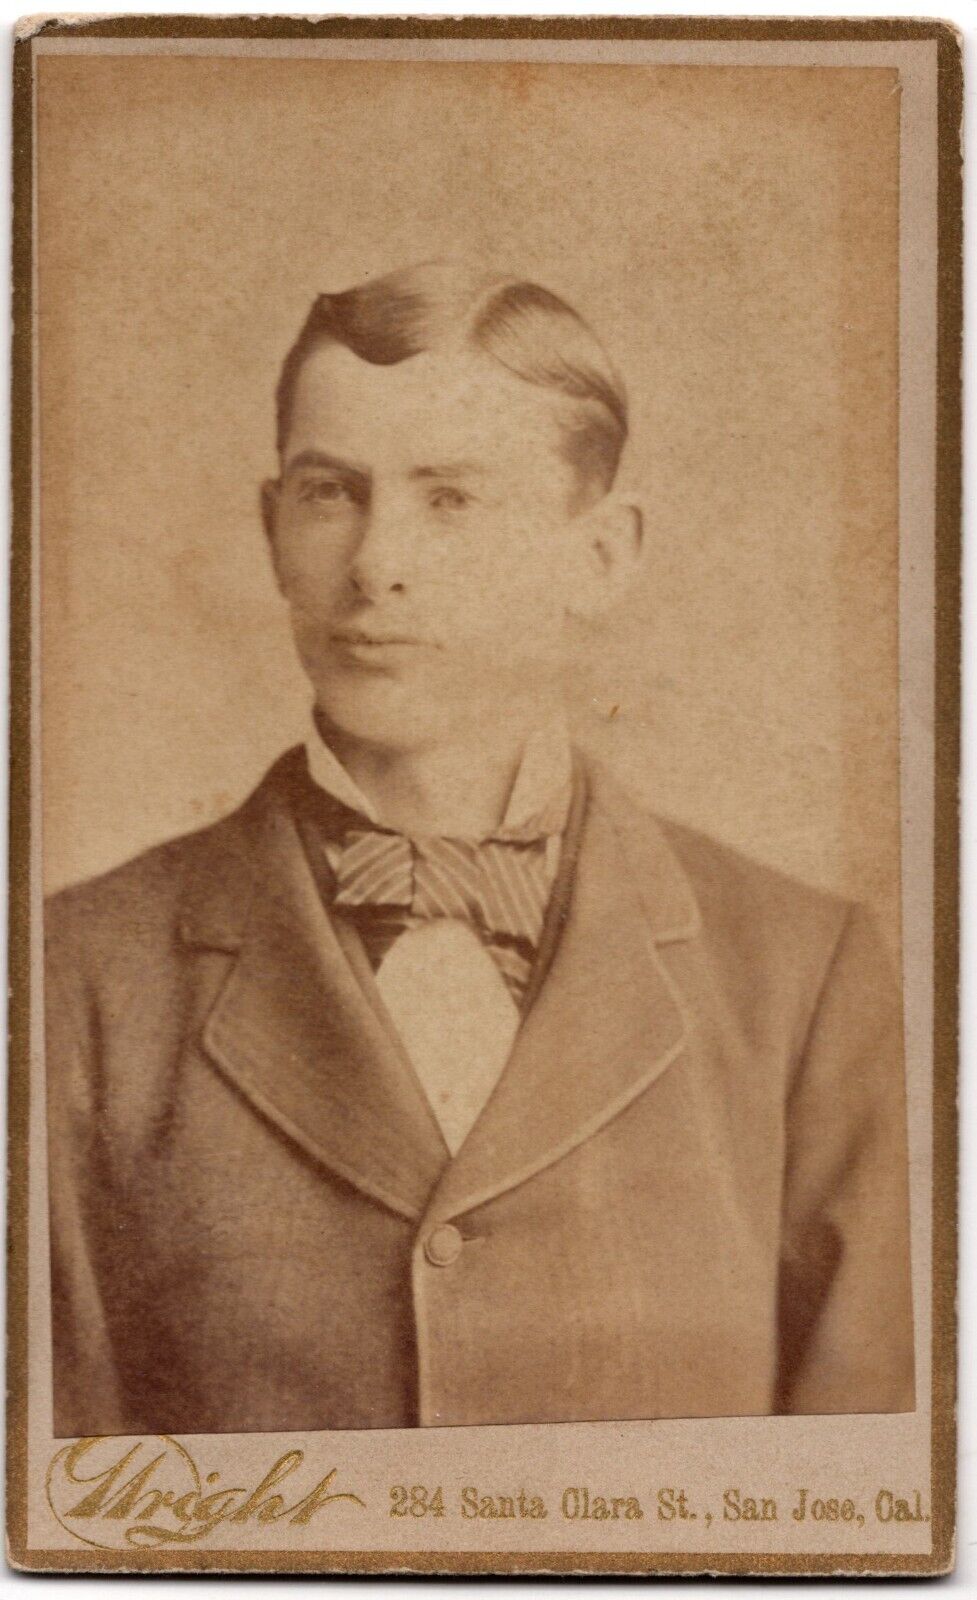 ANTIQUE CDV C. 1880s WRIGHT HANDSOME YOUNG MAN IN SUIT NAMED SAN JOSE CALIFORNIA